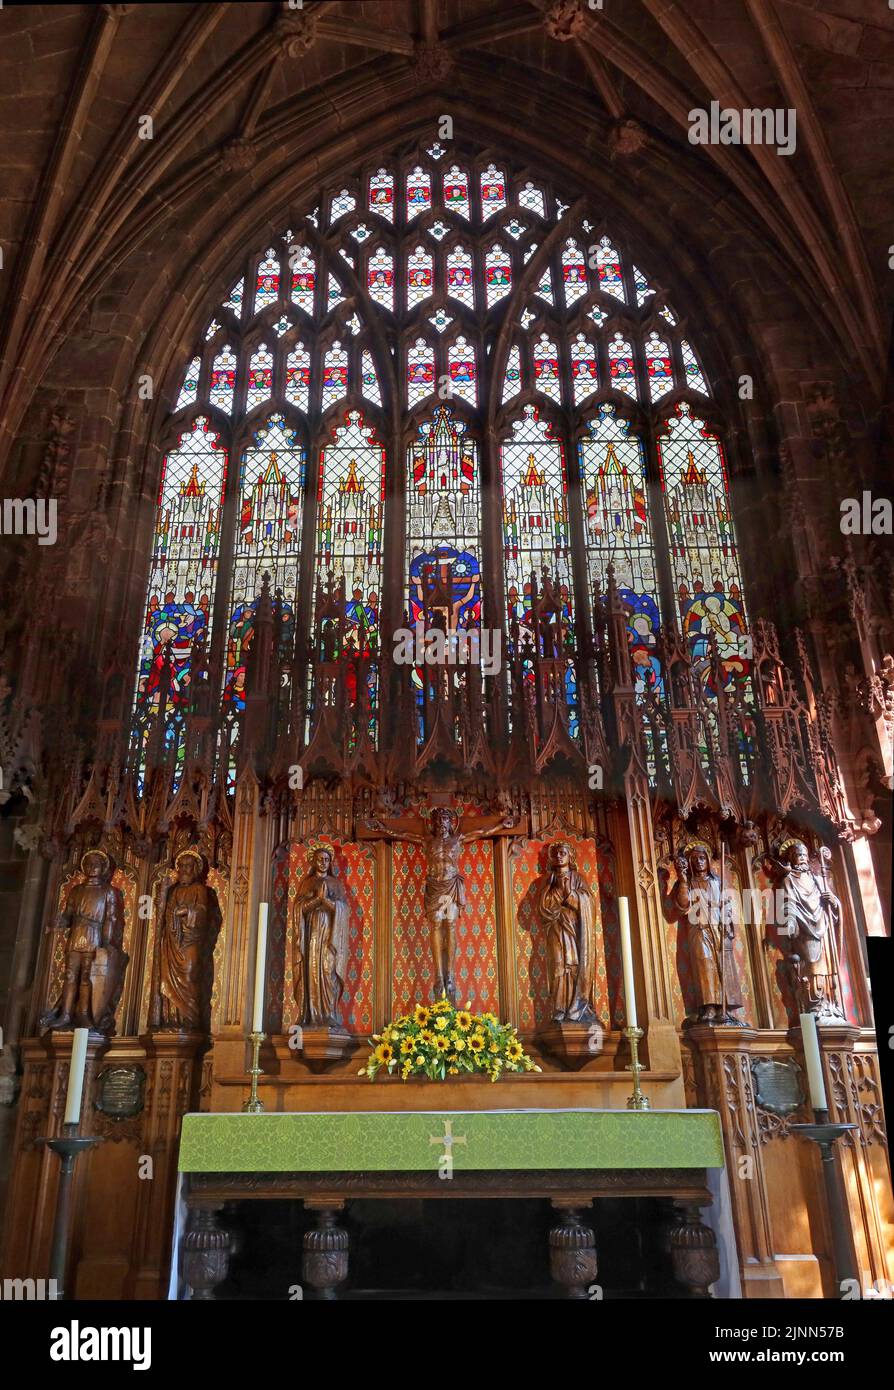 Altar & stained glass window in St Mary's Church, Church Lane, Nantwich, Cheshire, England, UK,  CW5 5RQ Stock Photo